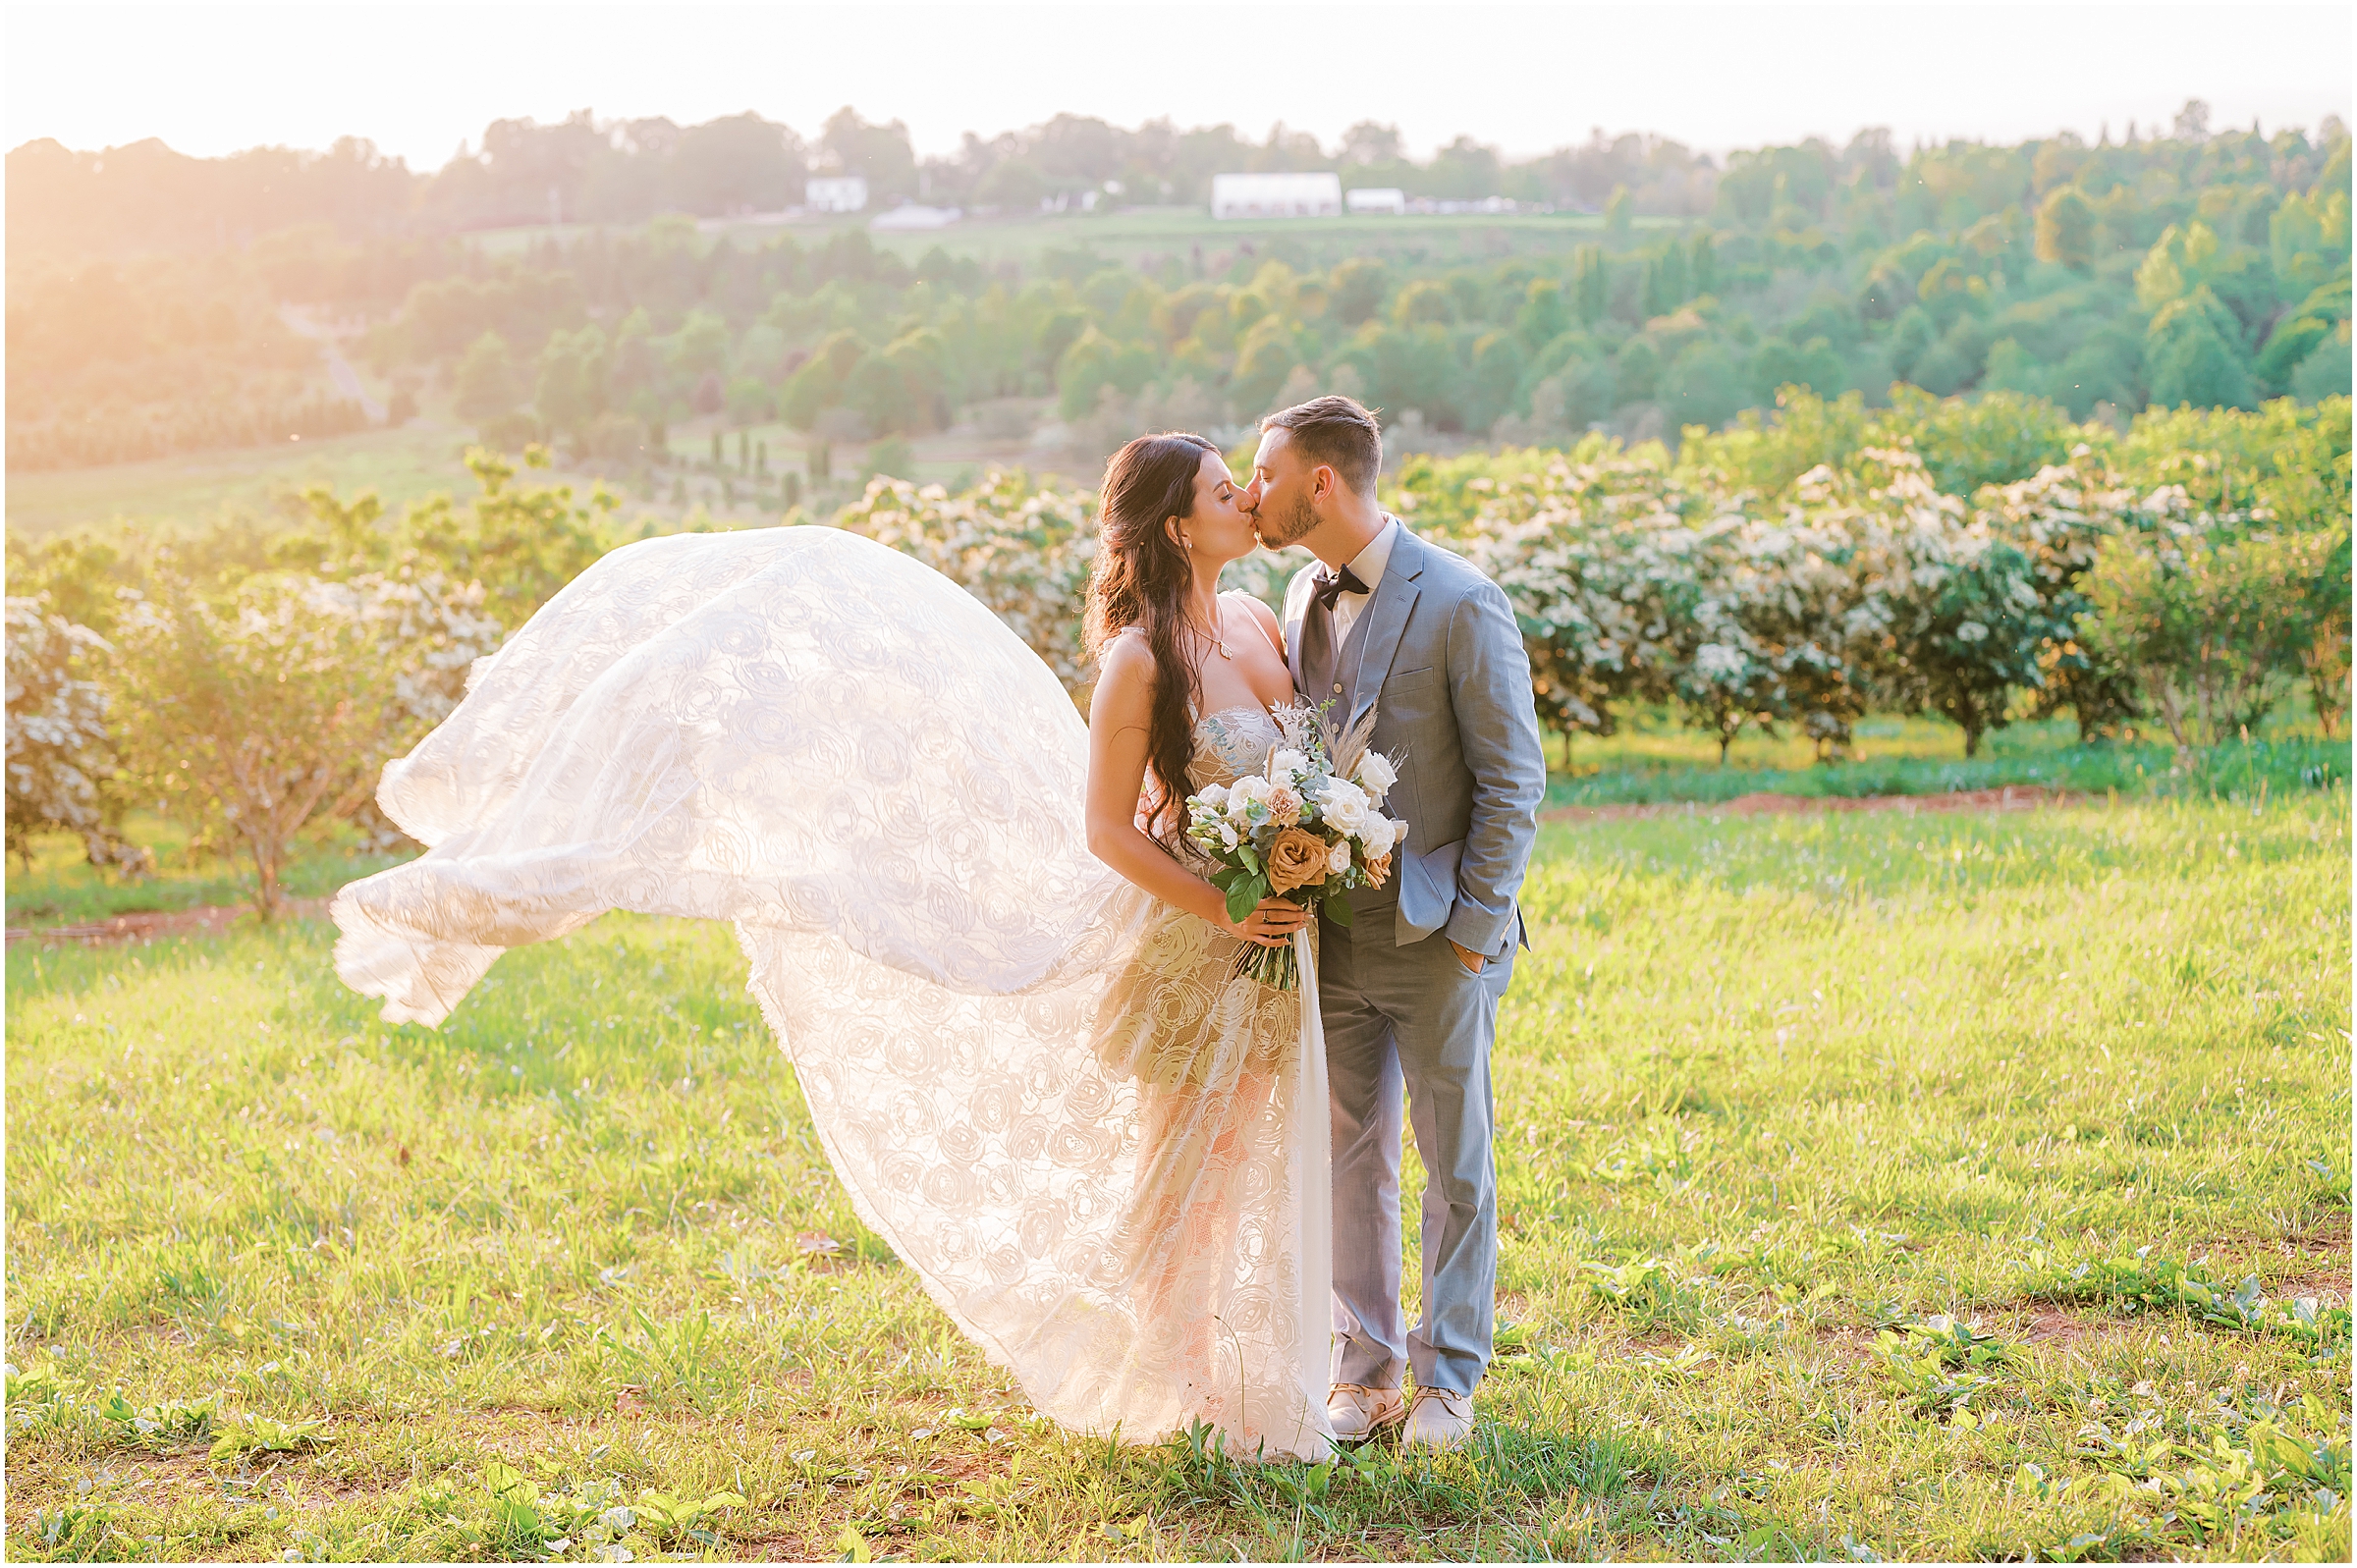 Kiss between bride and groom with dress blowing in the wind